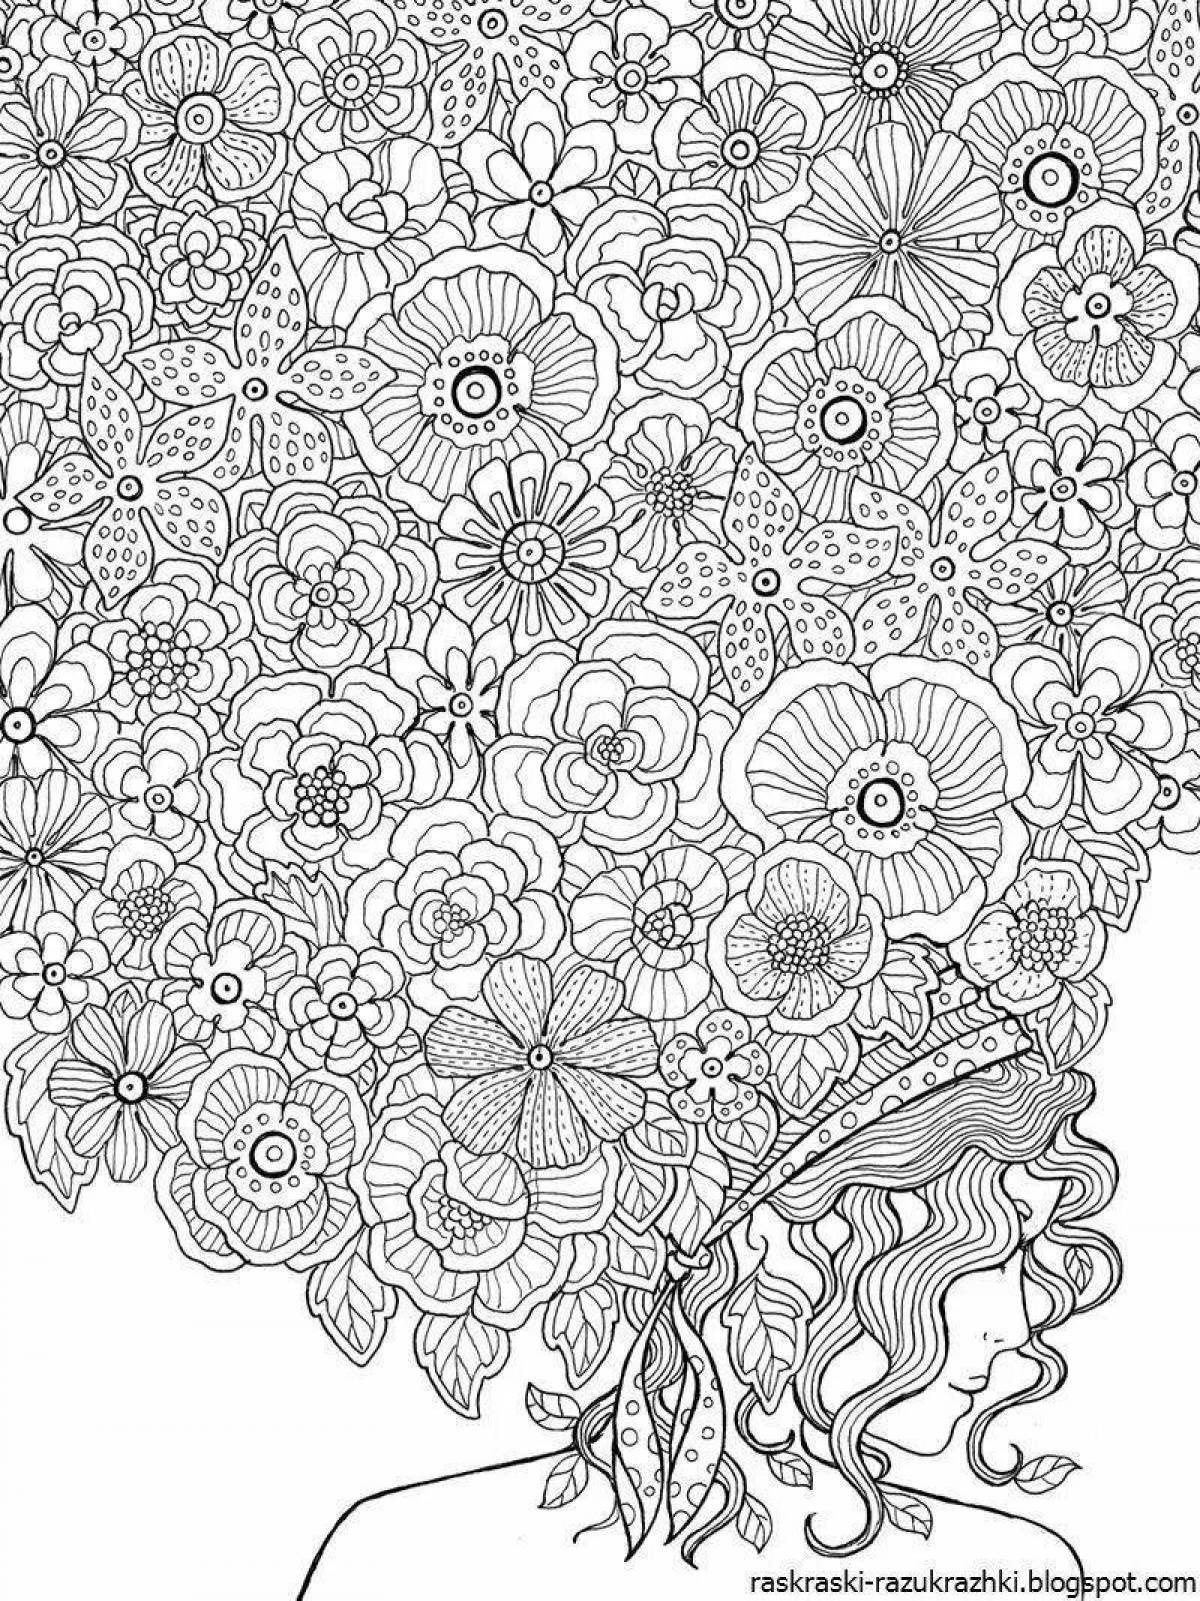 An inspirational anti-stress coloring book for adults